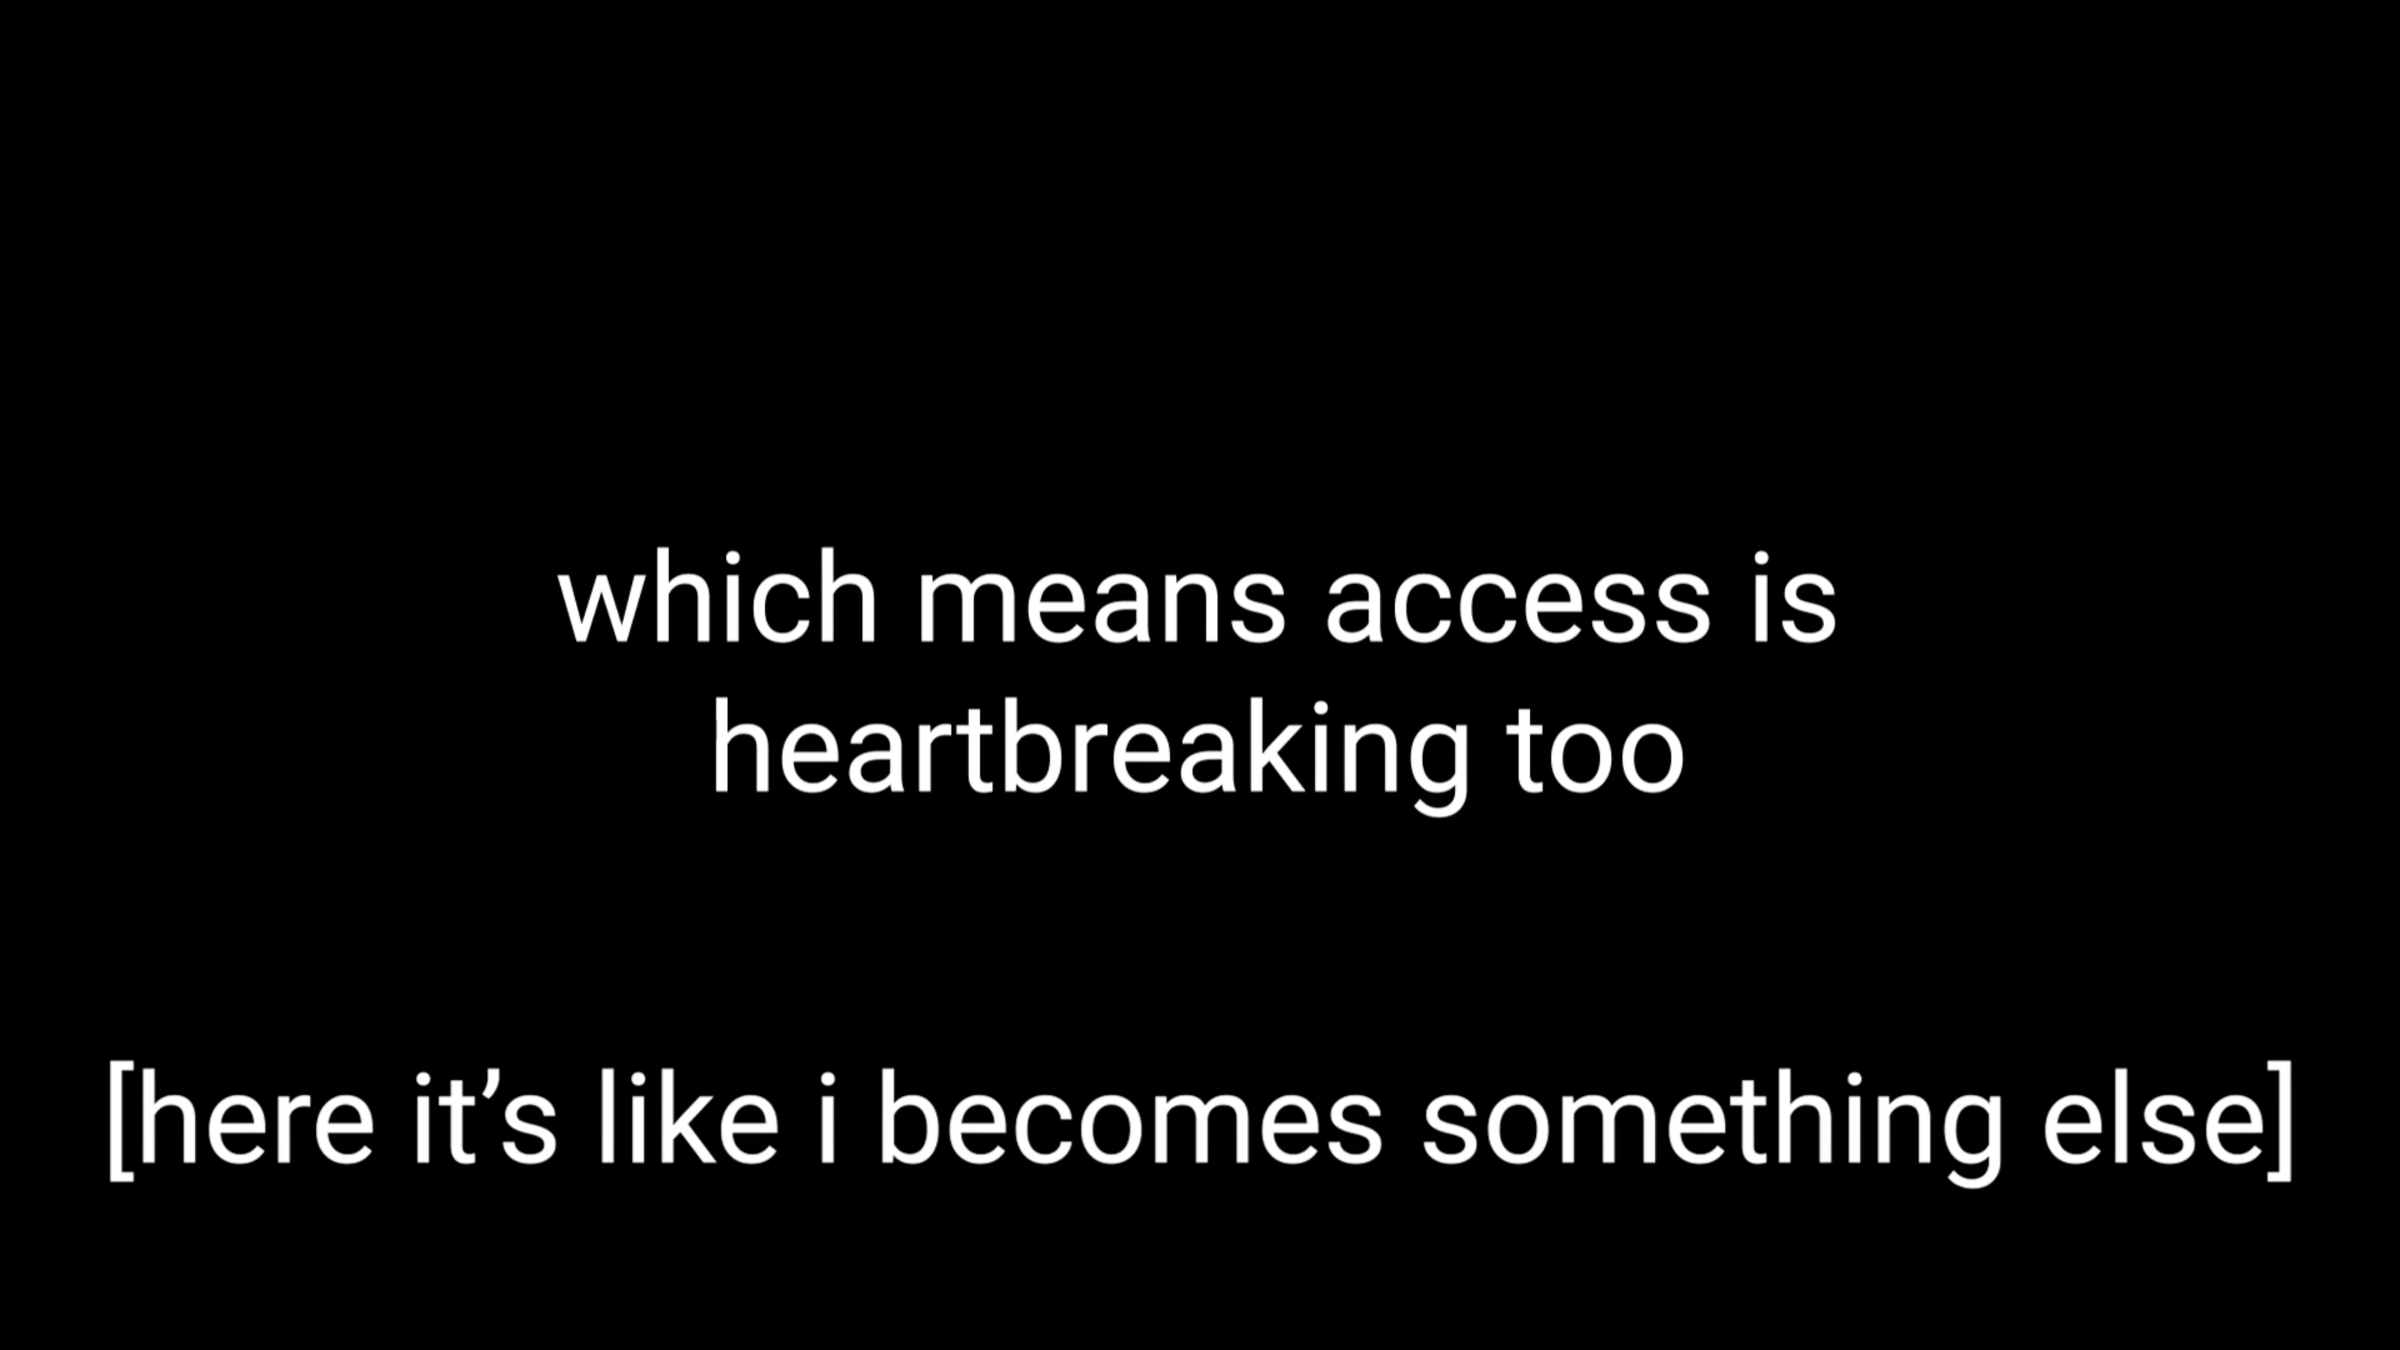 White text on a black screen: “which means access is heartbreaking too”. Underneath, text of the same size in brackets: “[here it’s like i becomes something else]”.